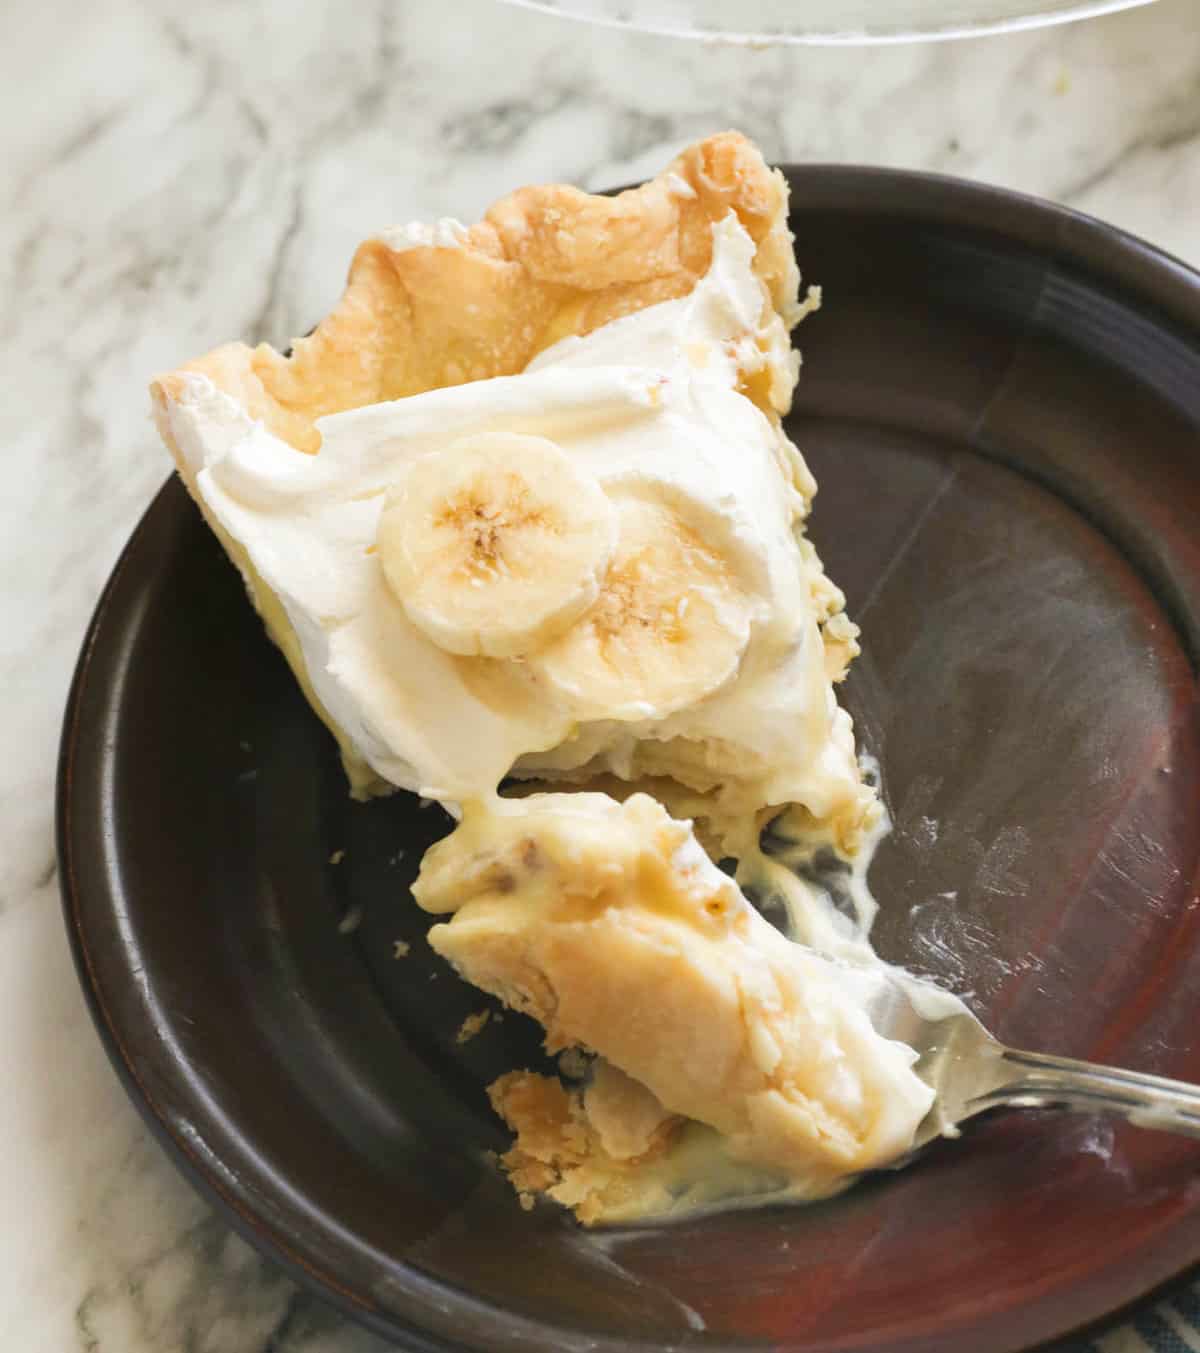 A slice of banana cream pie with a fork